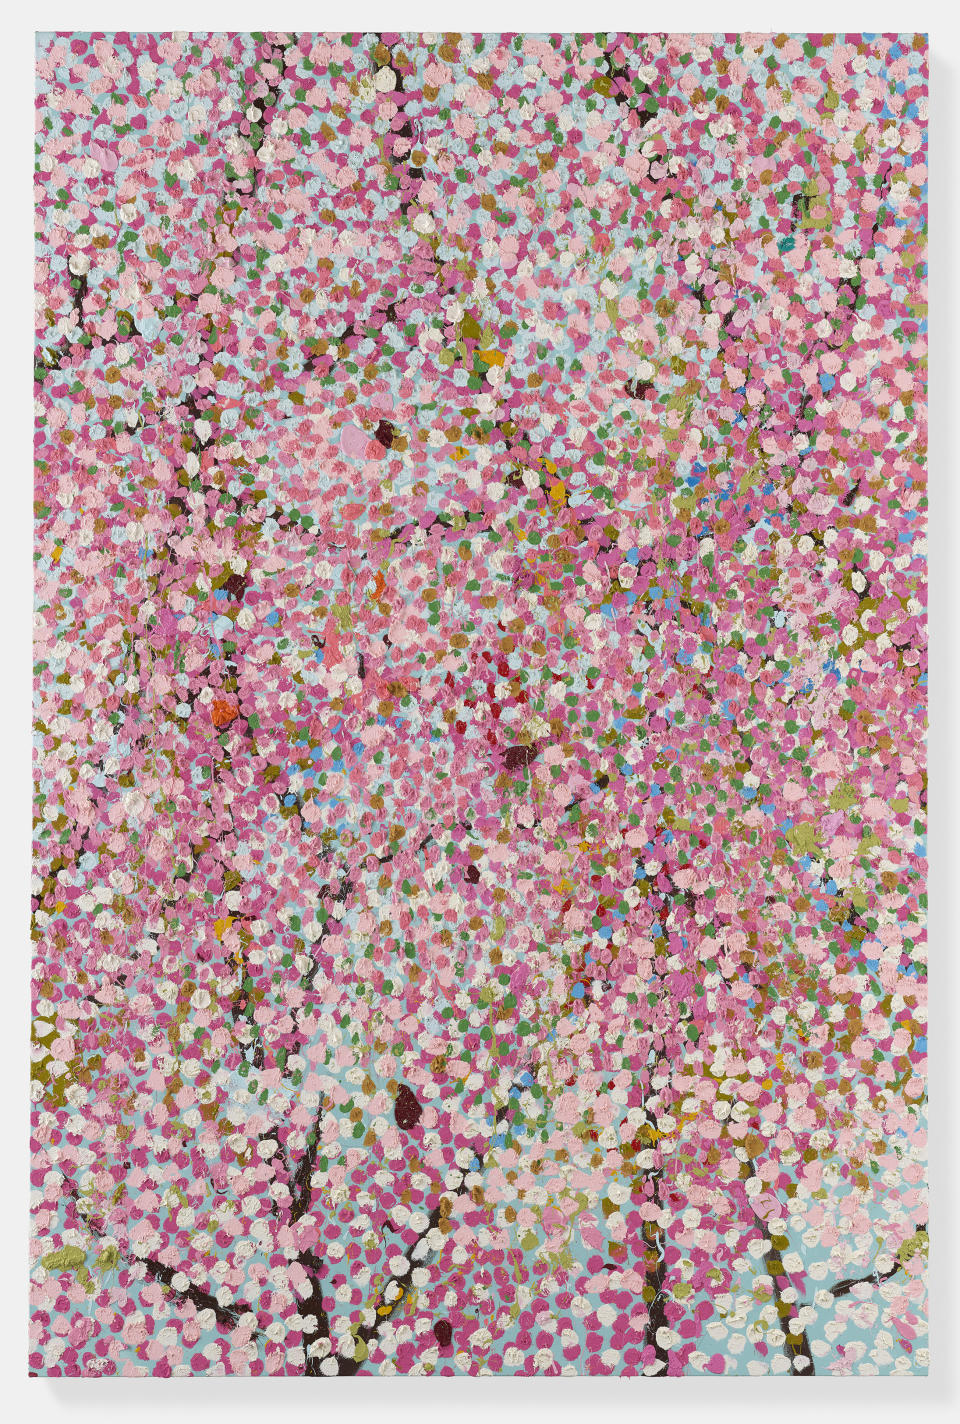 “Fantasia Blossom,” by Damien Hirst - Credit: Courtesy of Fondation Cartier